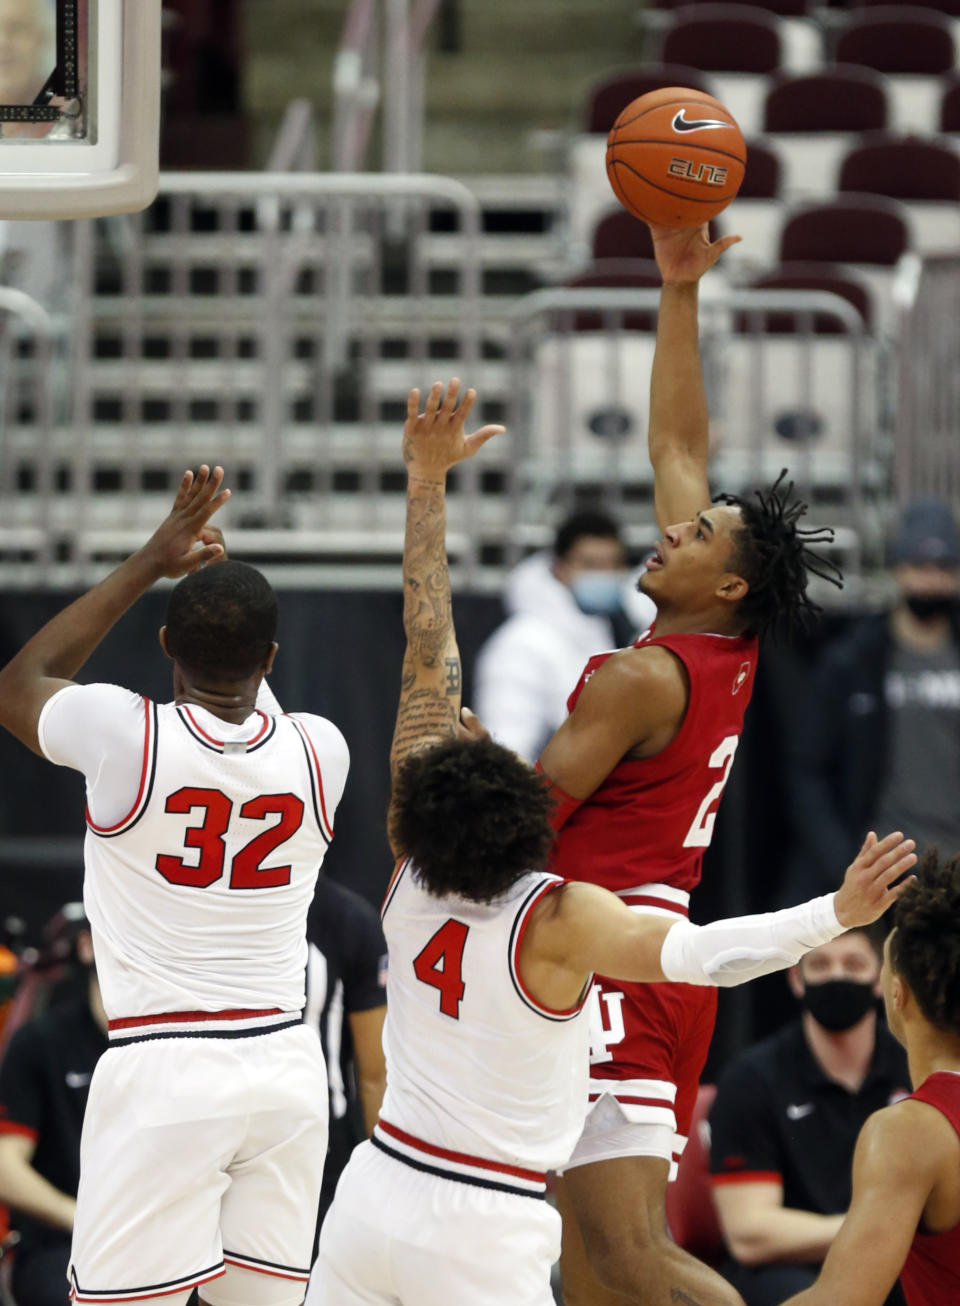 Indiana guard Armaan Franklin, left, goes up for a shot against Ohio State forward E.J. Liddell, left, and guard Duane Washington during the first half of an NCAA college basketball game in Columbus, Ohio, Saturday, Feb. 13, 2021. (AP Photo/Paul Vernon)